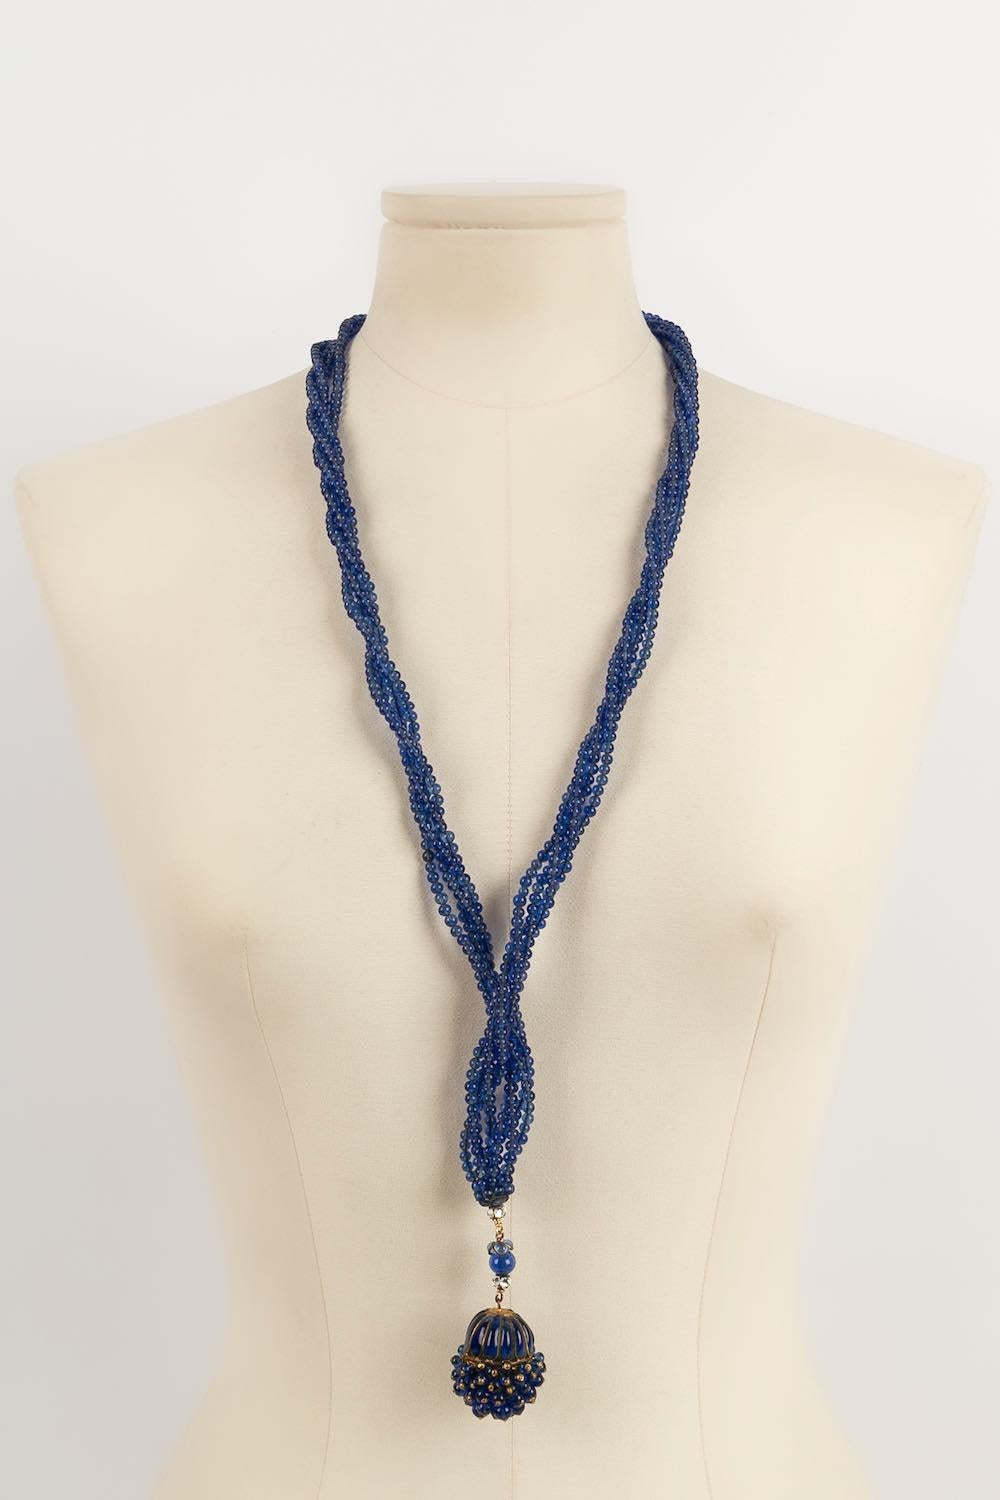 Necklace of blue glass beads holding a pendant.

Additional information:
Condition: Very good condition
Dimensions: Length : 83 cm

Seller Reference: BC105